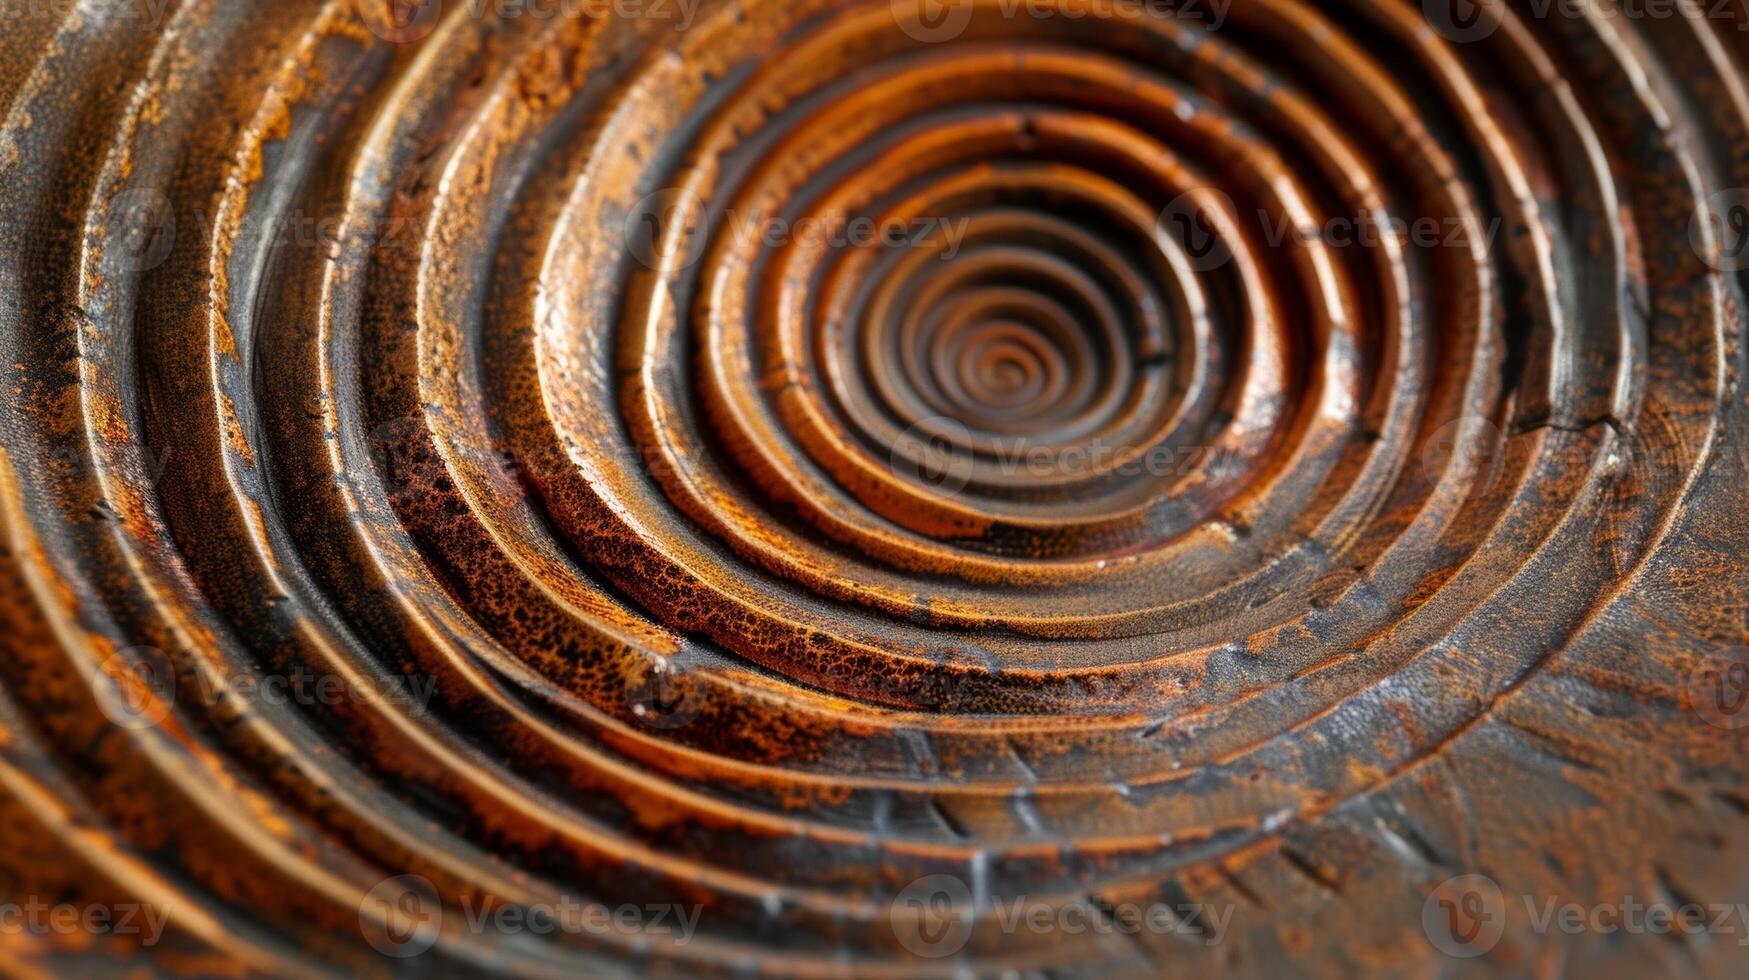 A ceramic plate with a striking spiral pattern achieved through the technique of surface carving. photo